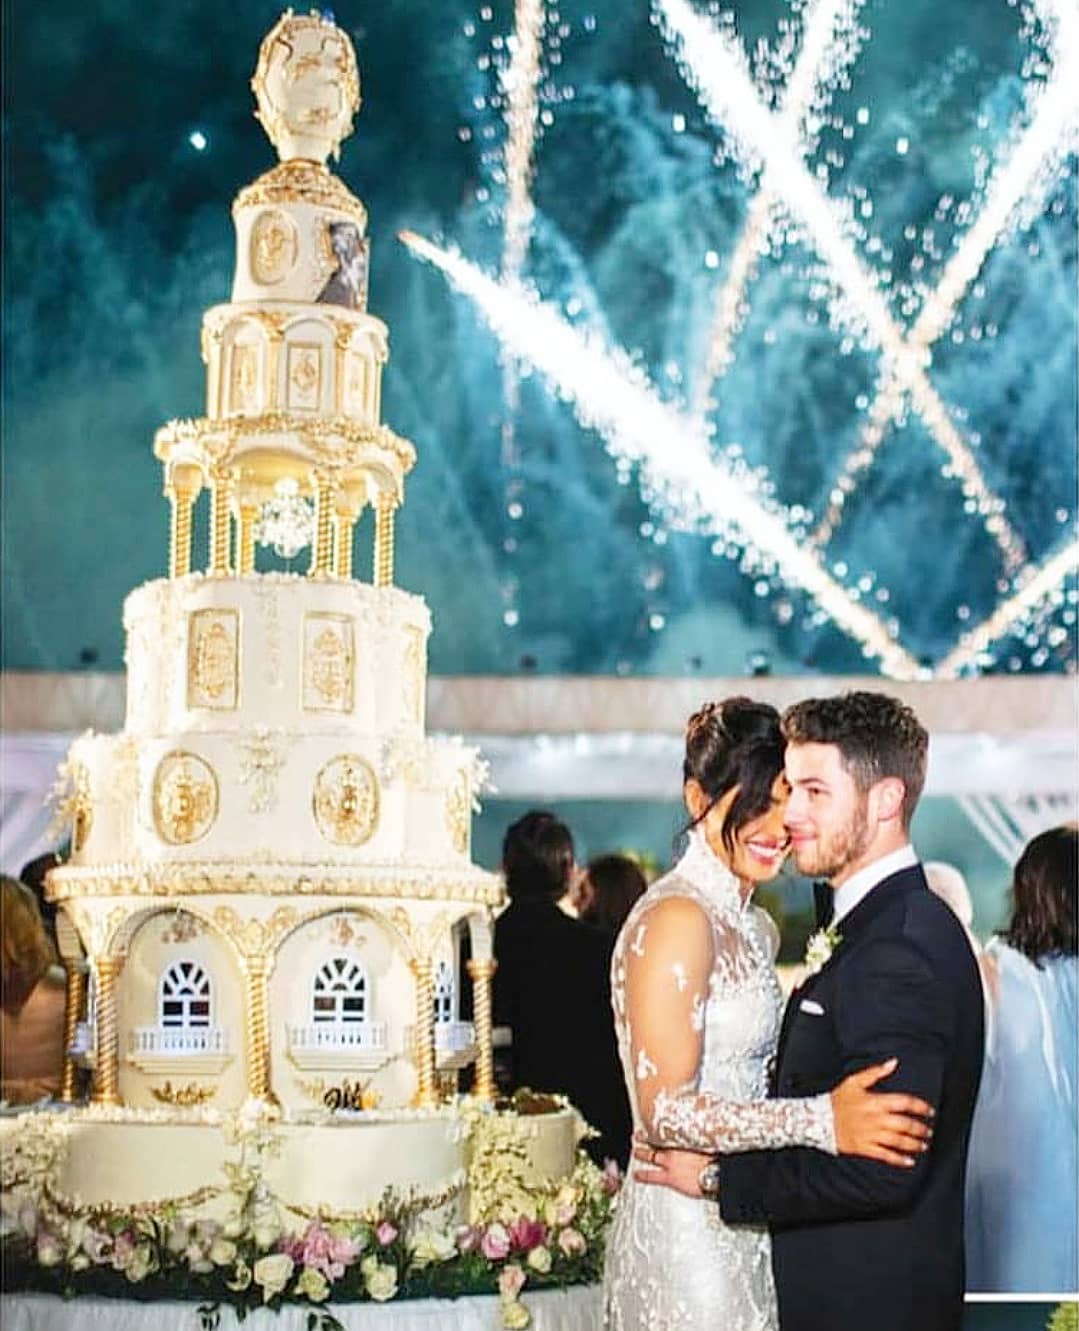 The 6 Most Unique Wedding Cakes on the Internet